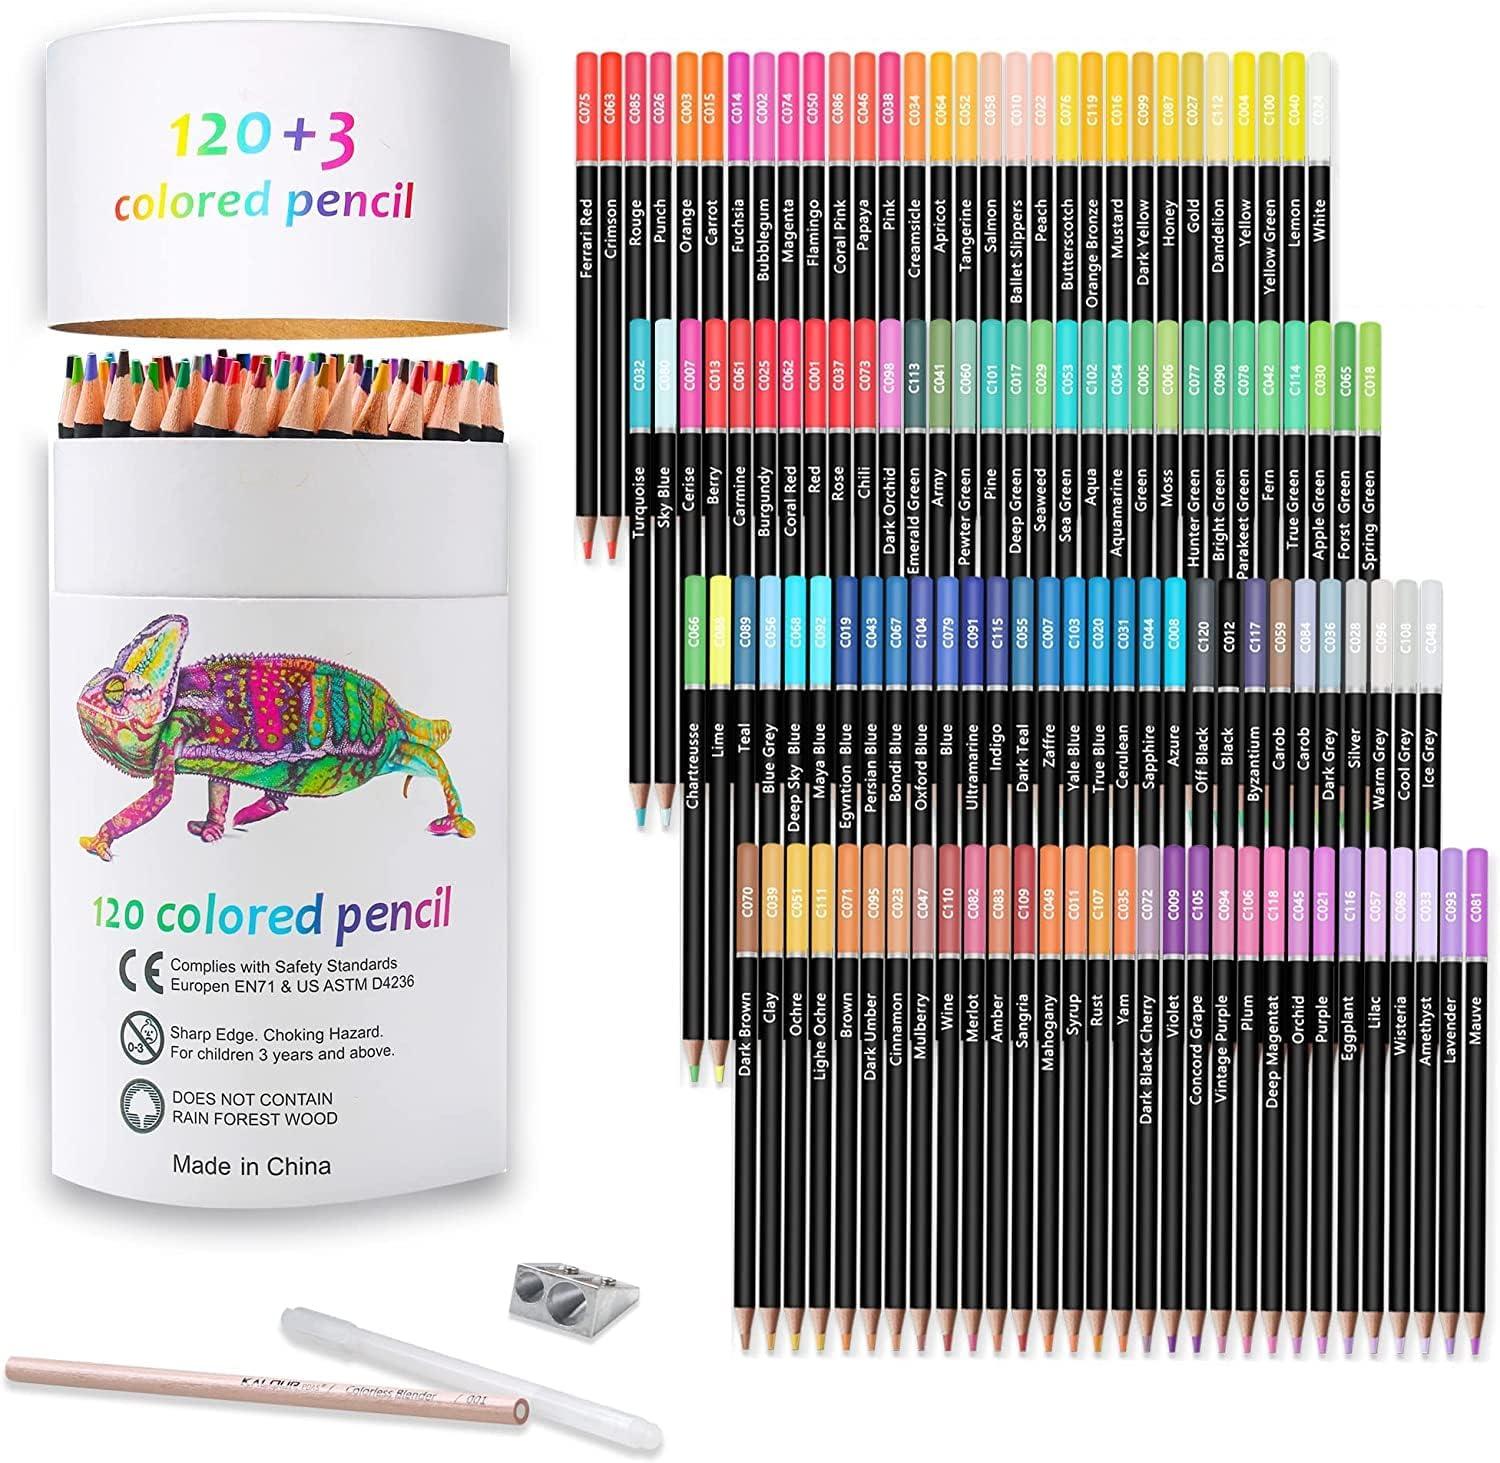 premium colored pencils set of 120 colors artists soft core with vibrant color ideal for drawing sketching